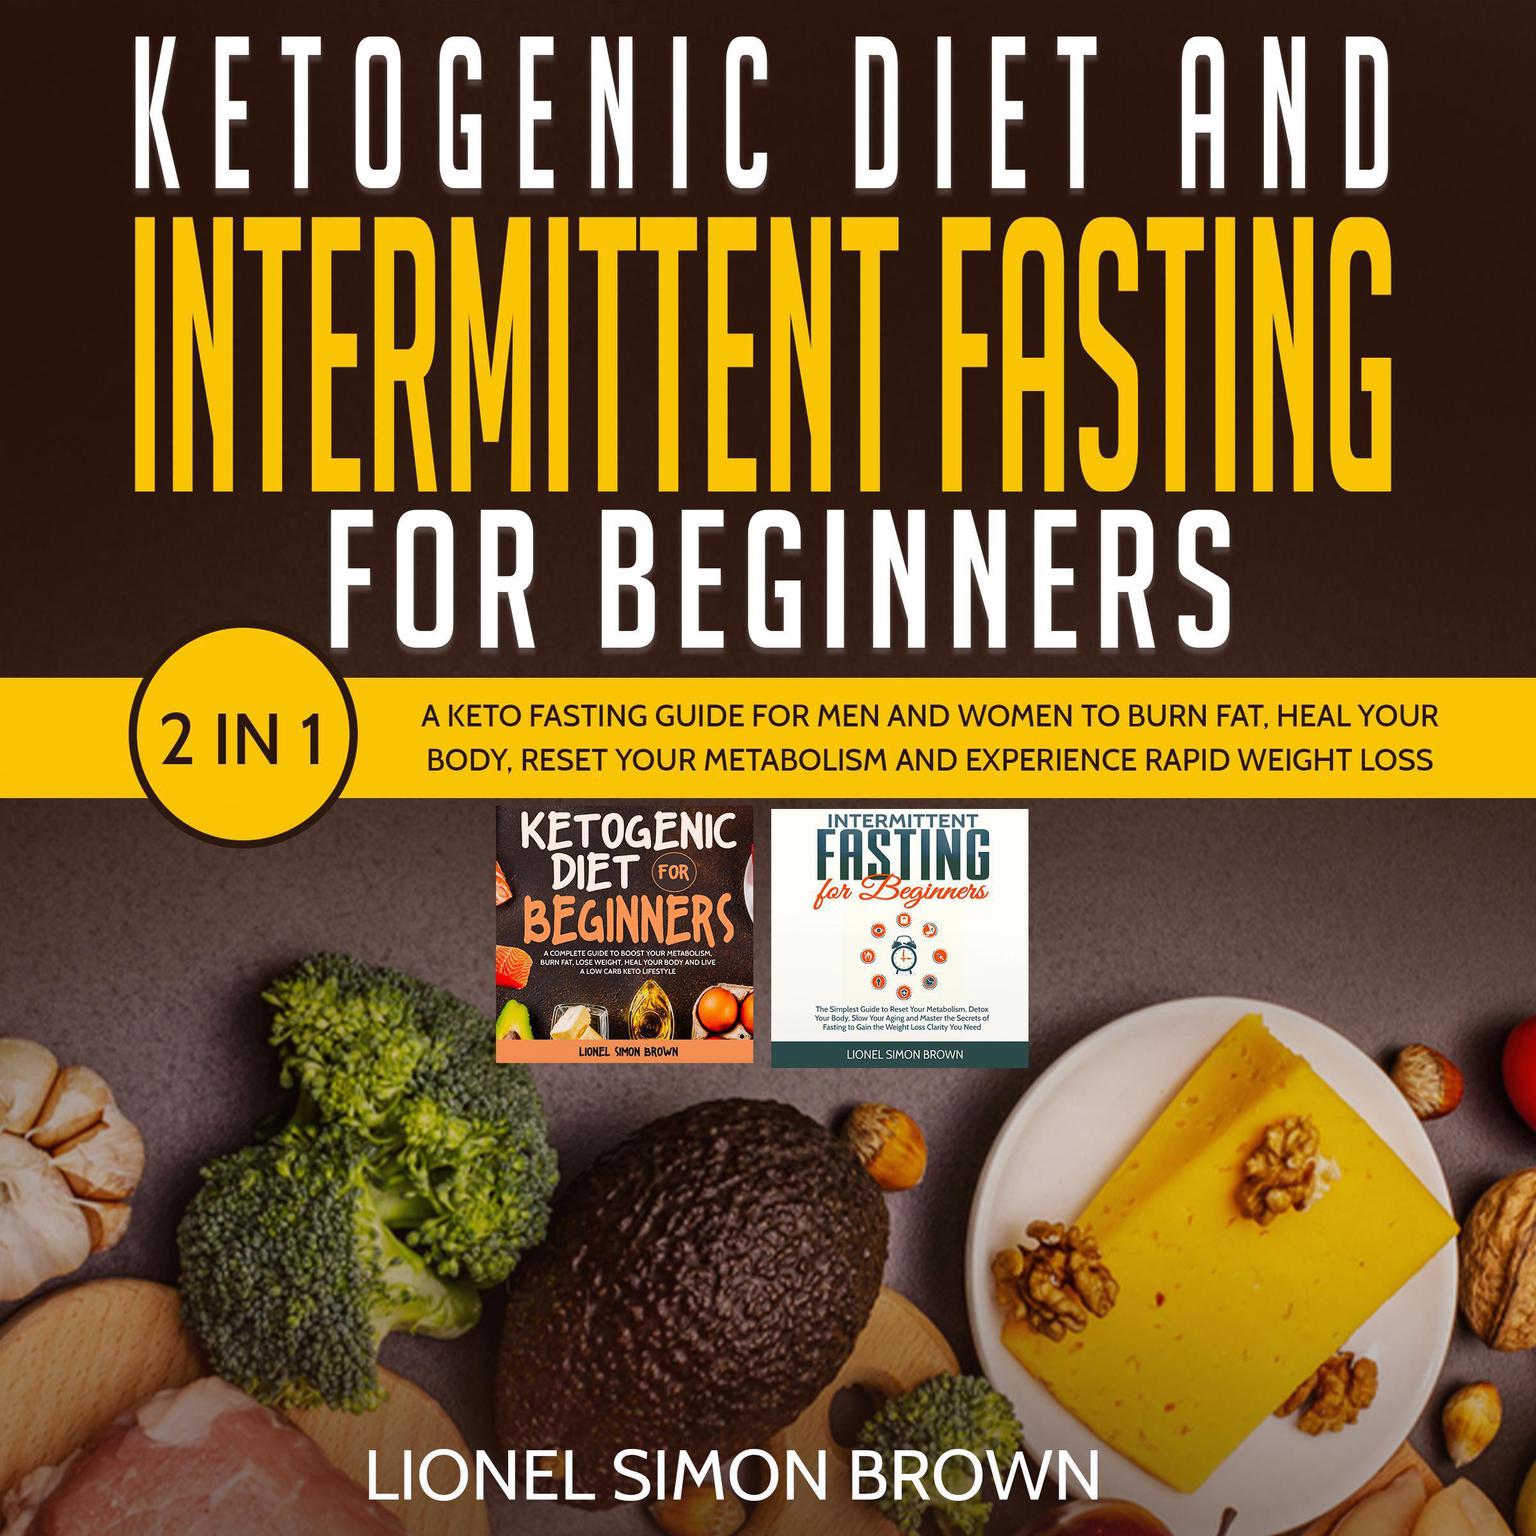 Ketogenic Diet and Intermittent Fasting for Beginners 2 In 1: A Keto Fasting Guide for Men and Women to Burn Fat, Heal Your Body, Reset Your Metabolism and Experience Rapid Weight Loss Audiobook, by Lionel Simon Brown